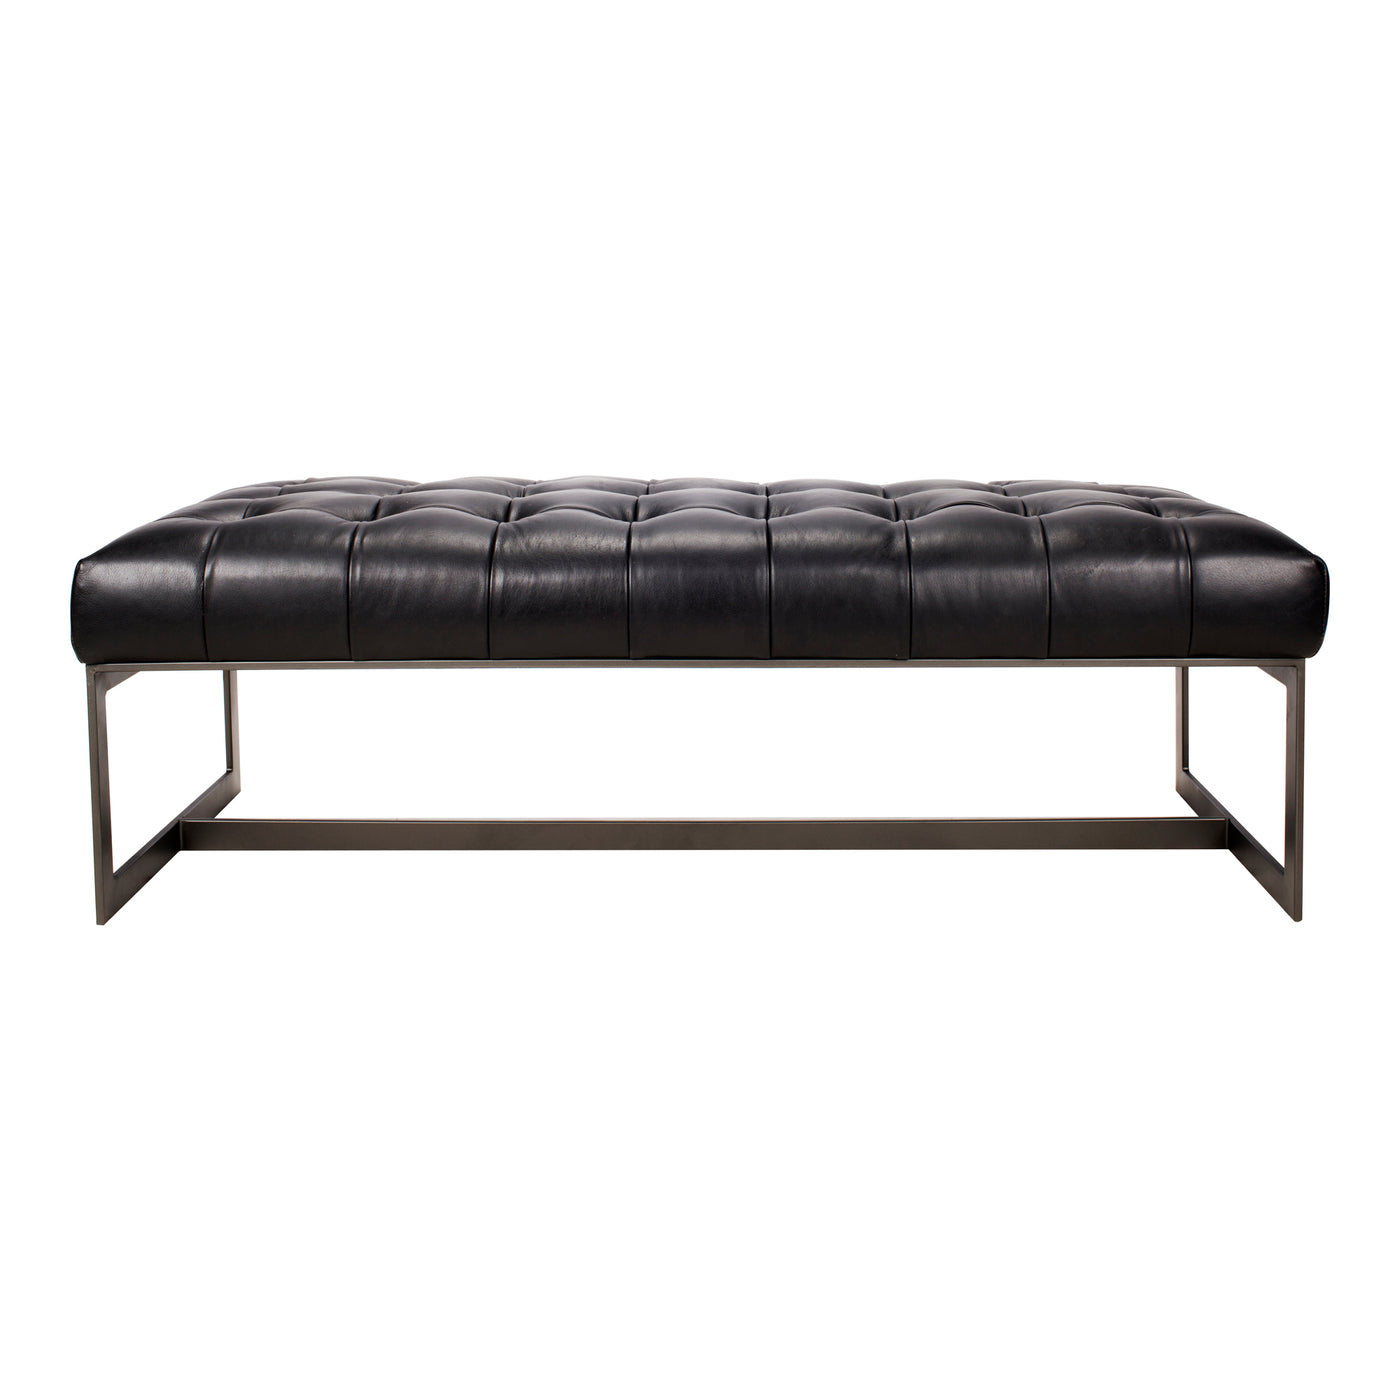 The Wyatt Bench is a good balance between industrial and glam aesthetic. The tufted, top-grain buffalo leather brings opul...